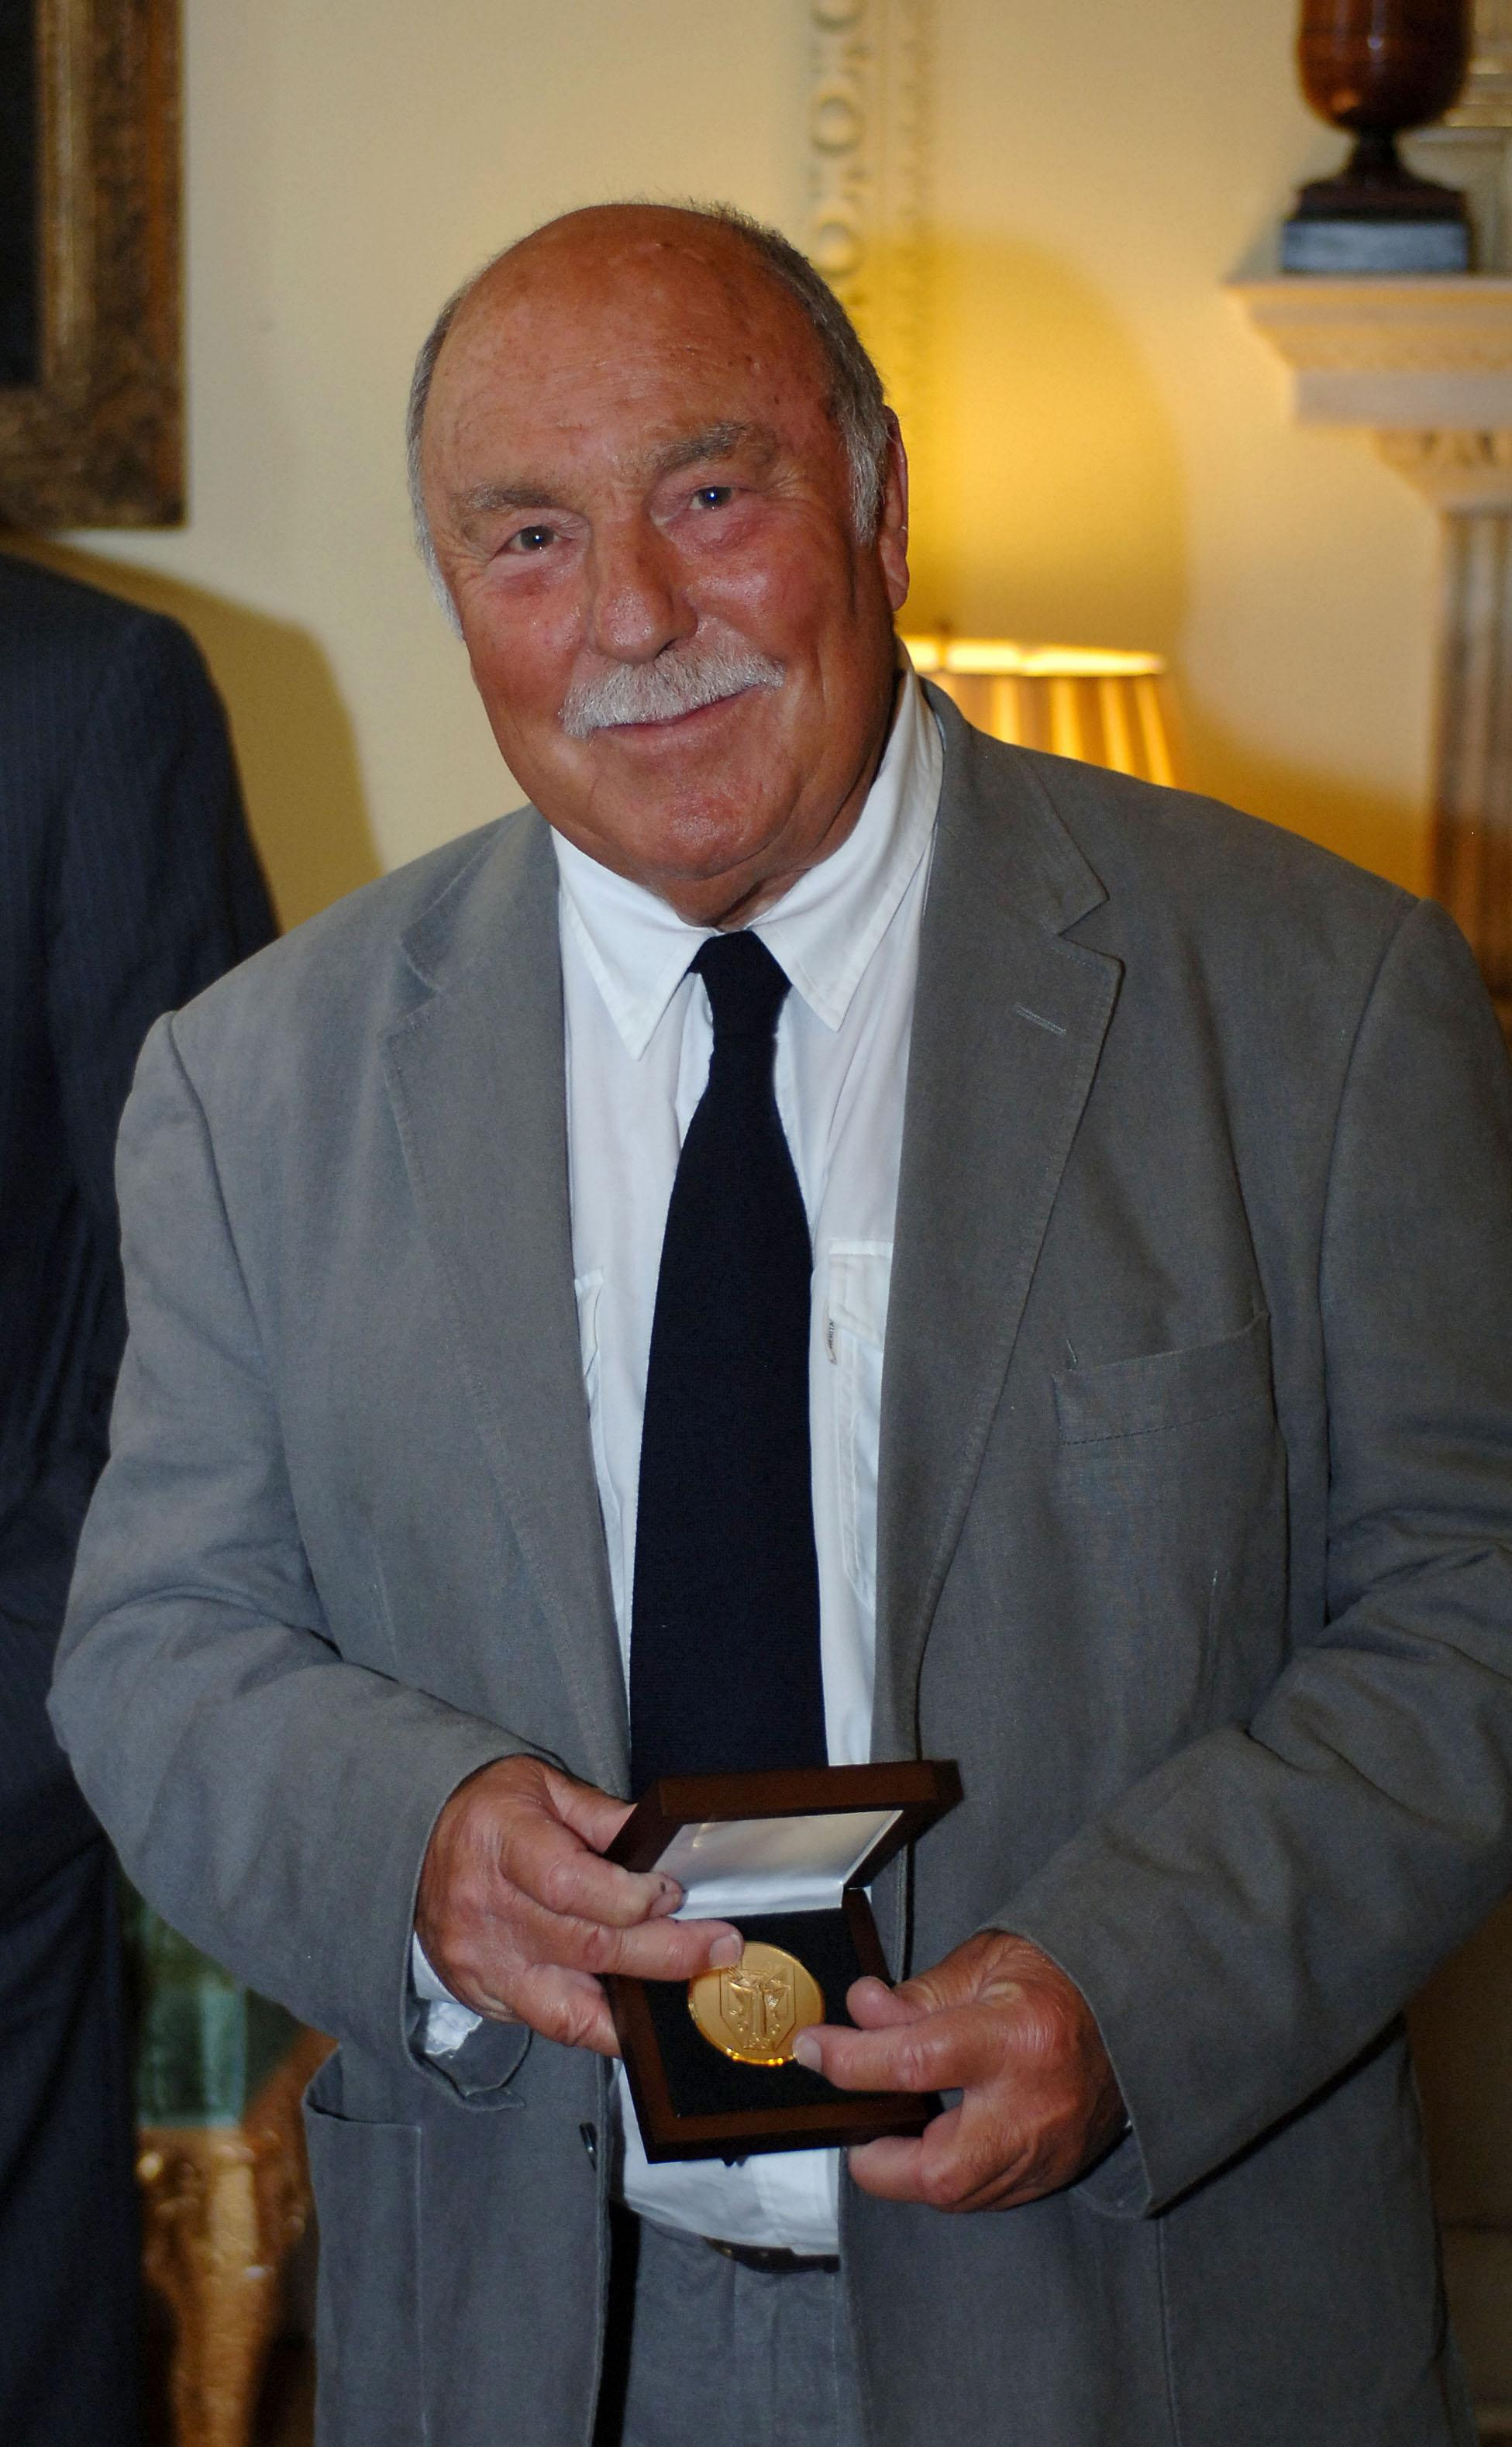 LONDON, UNITED KINGDOM - JUNE 10: Jimmy Greaves smiles after collecting his medal presented by Prime Minister Gordon Brown for representing his country in the 1966 World Cup at Downing Street on June 10, 2009 in London England. When England lifted the Wor